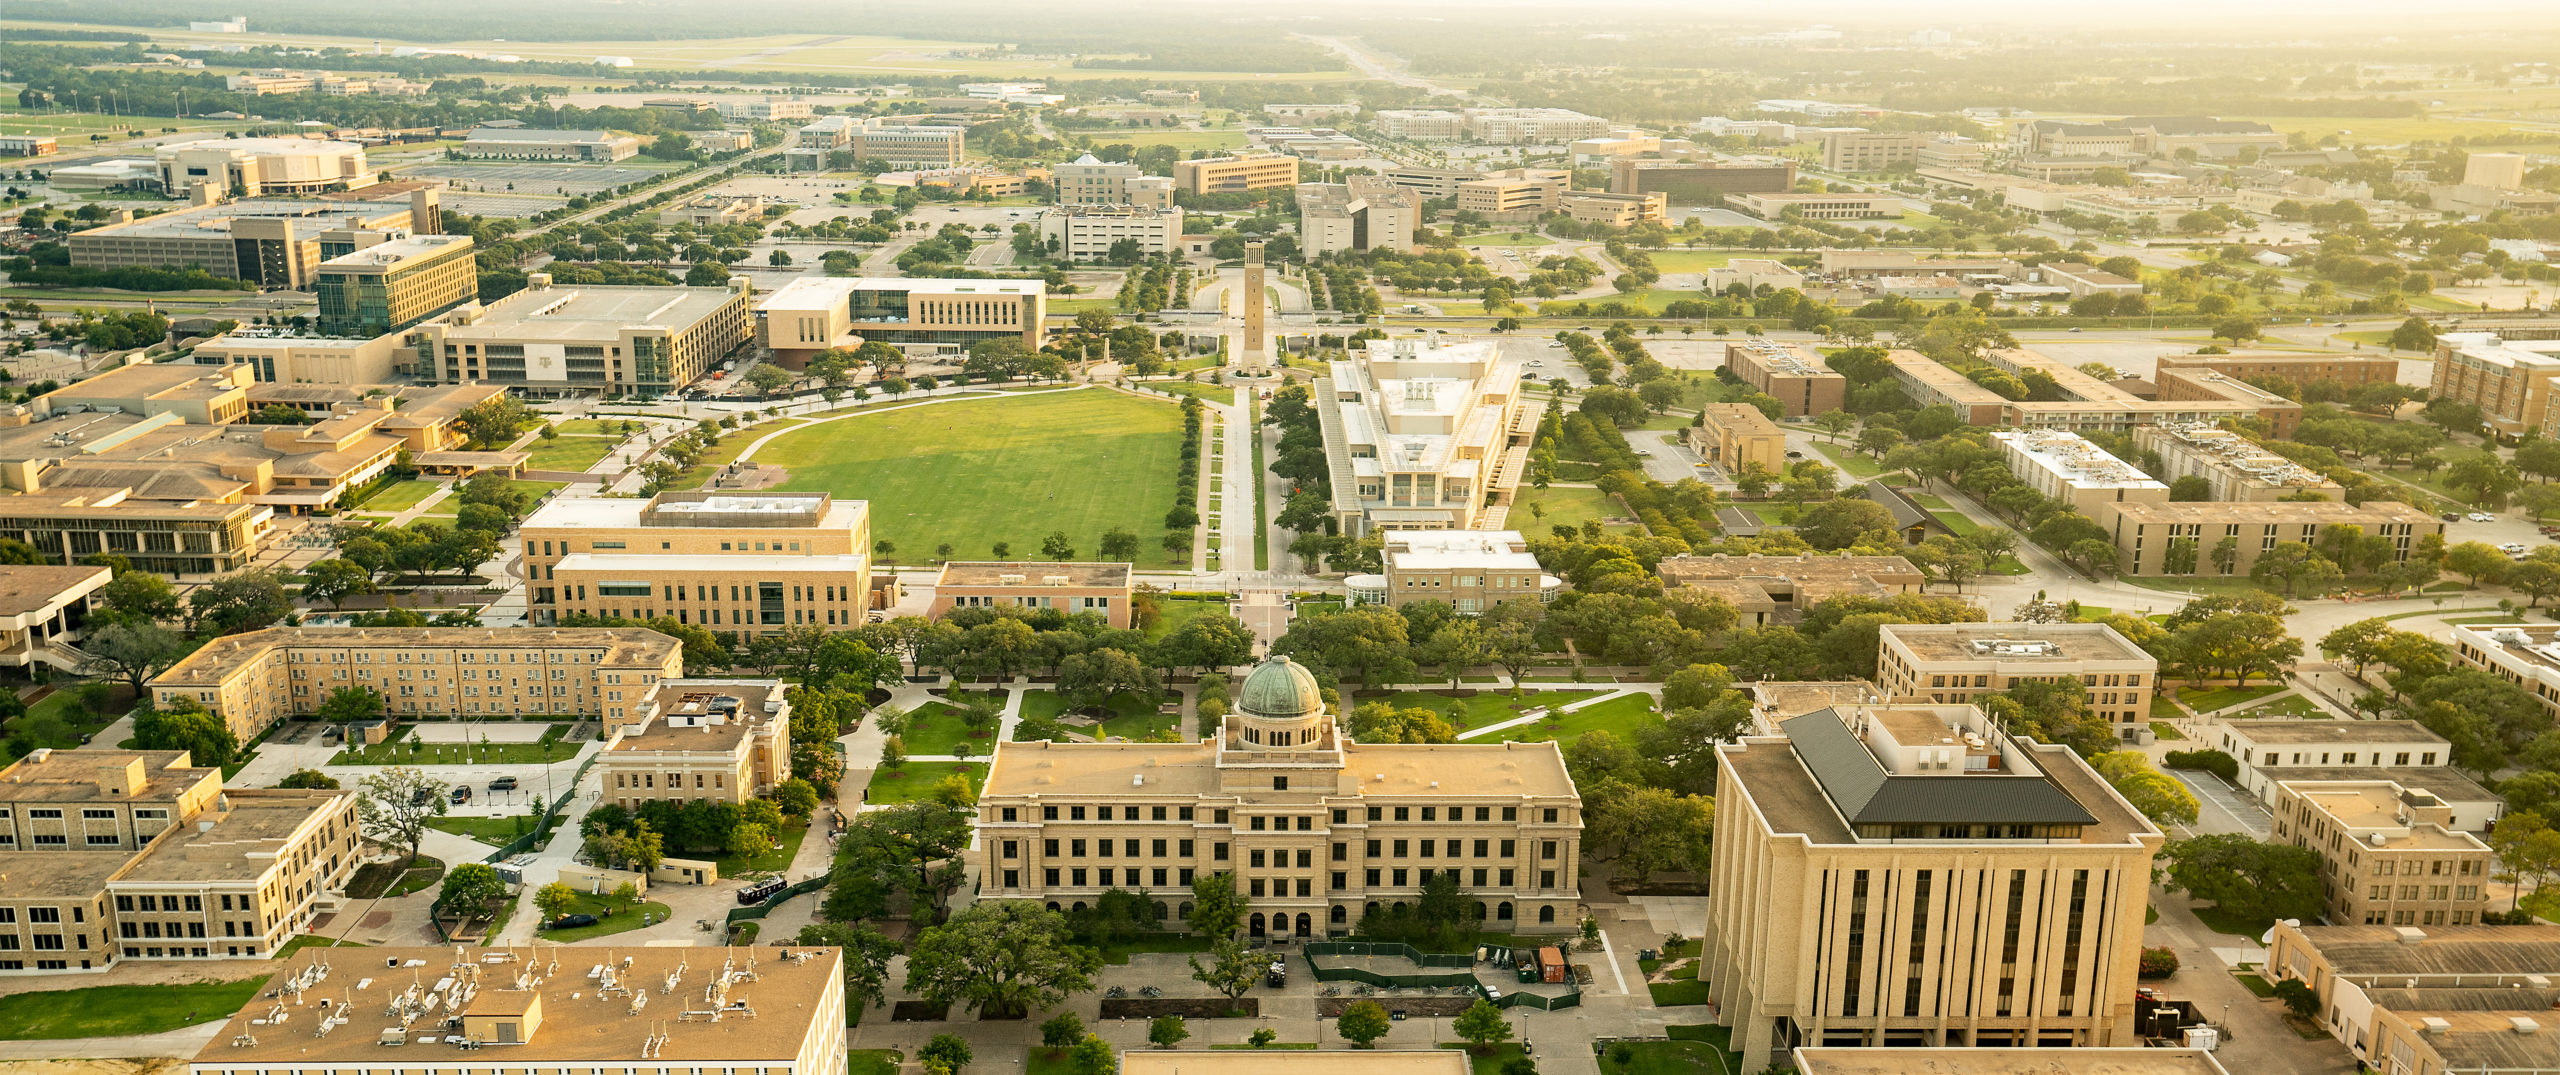 Aerial view of Texas A&M University Campus in College Station